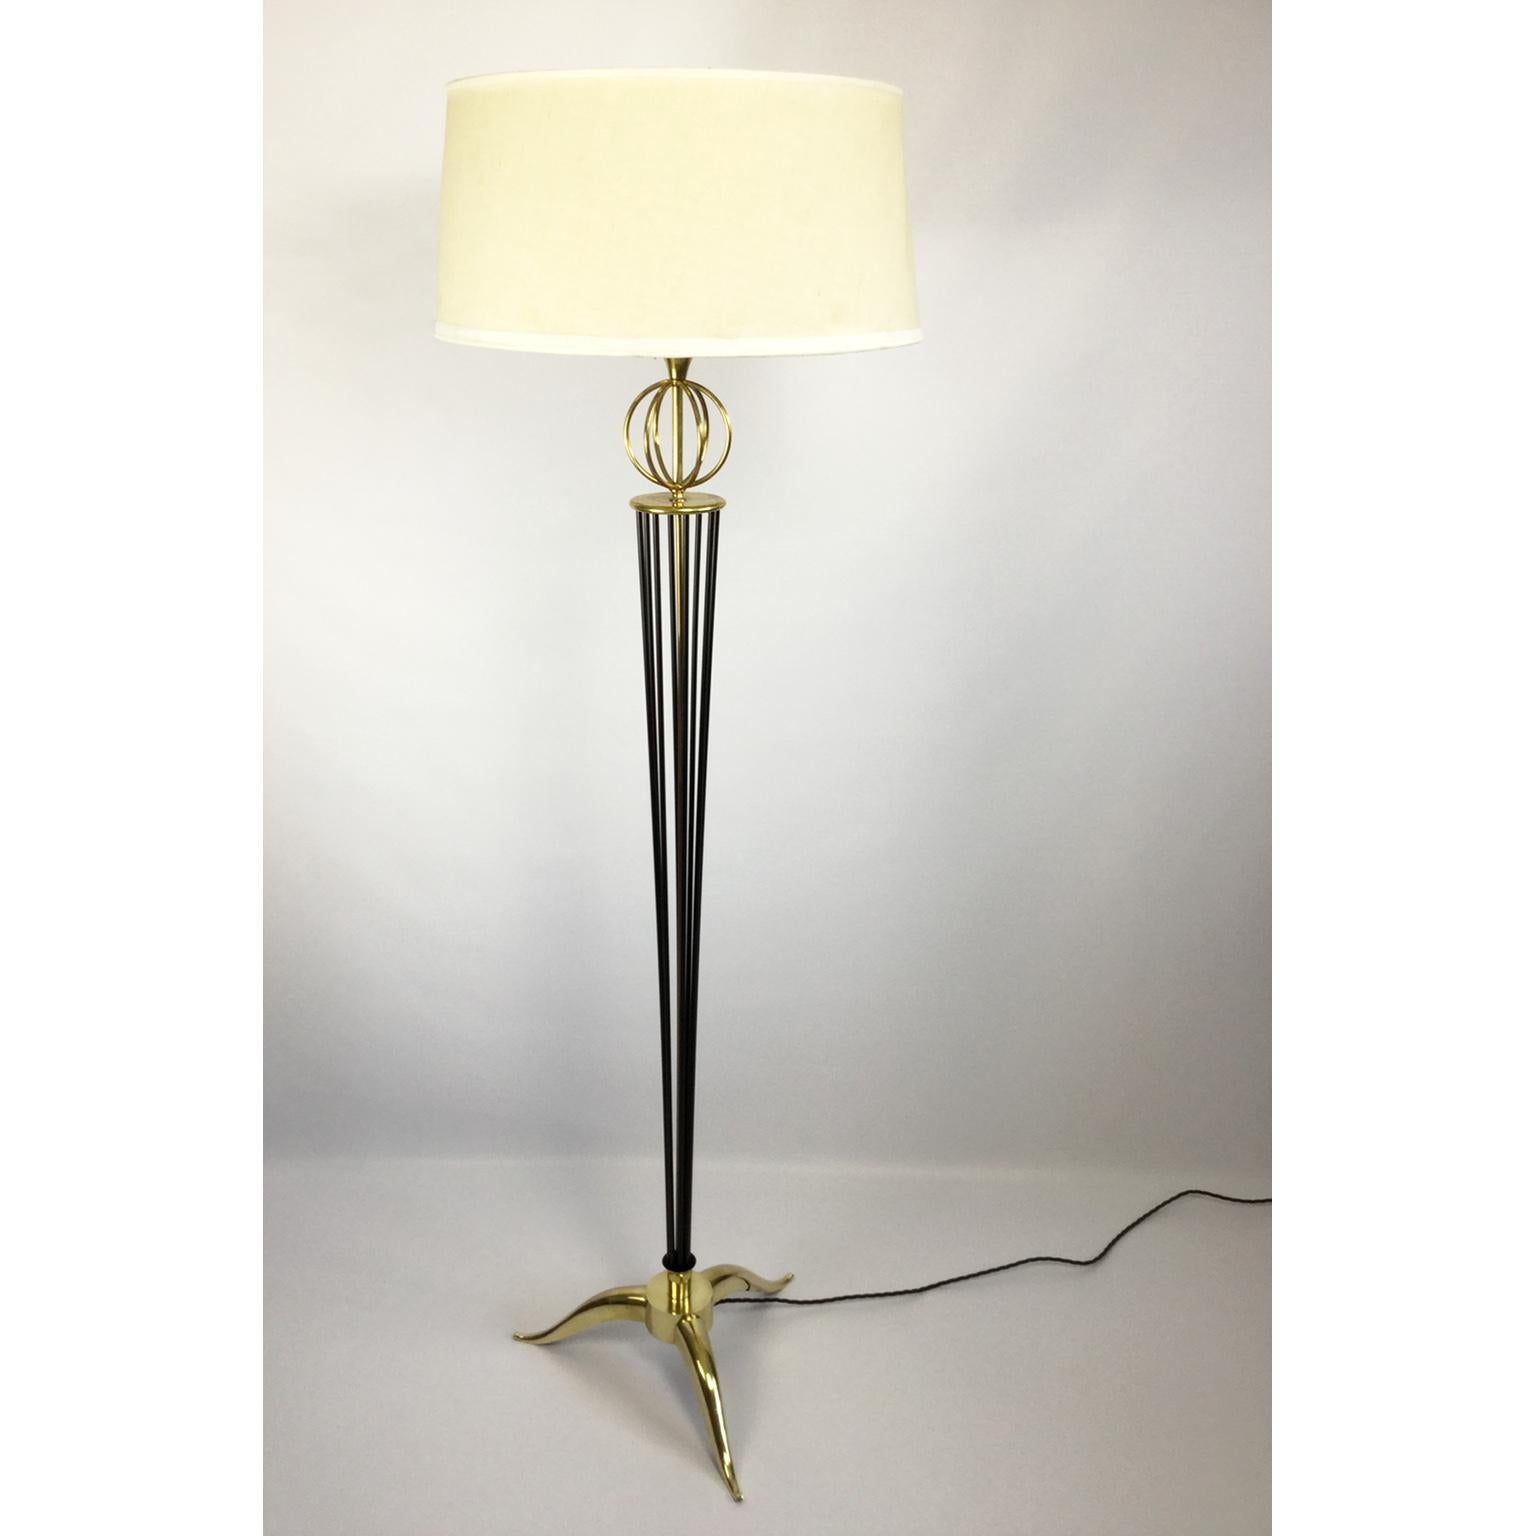 Neoclassical French Brass and Glass Floor Lamp by Maison Arlus, 1950s